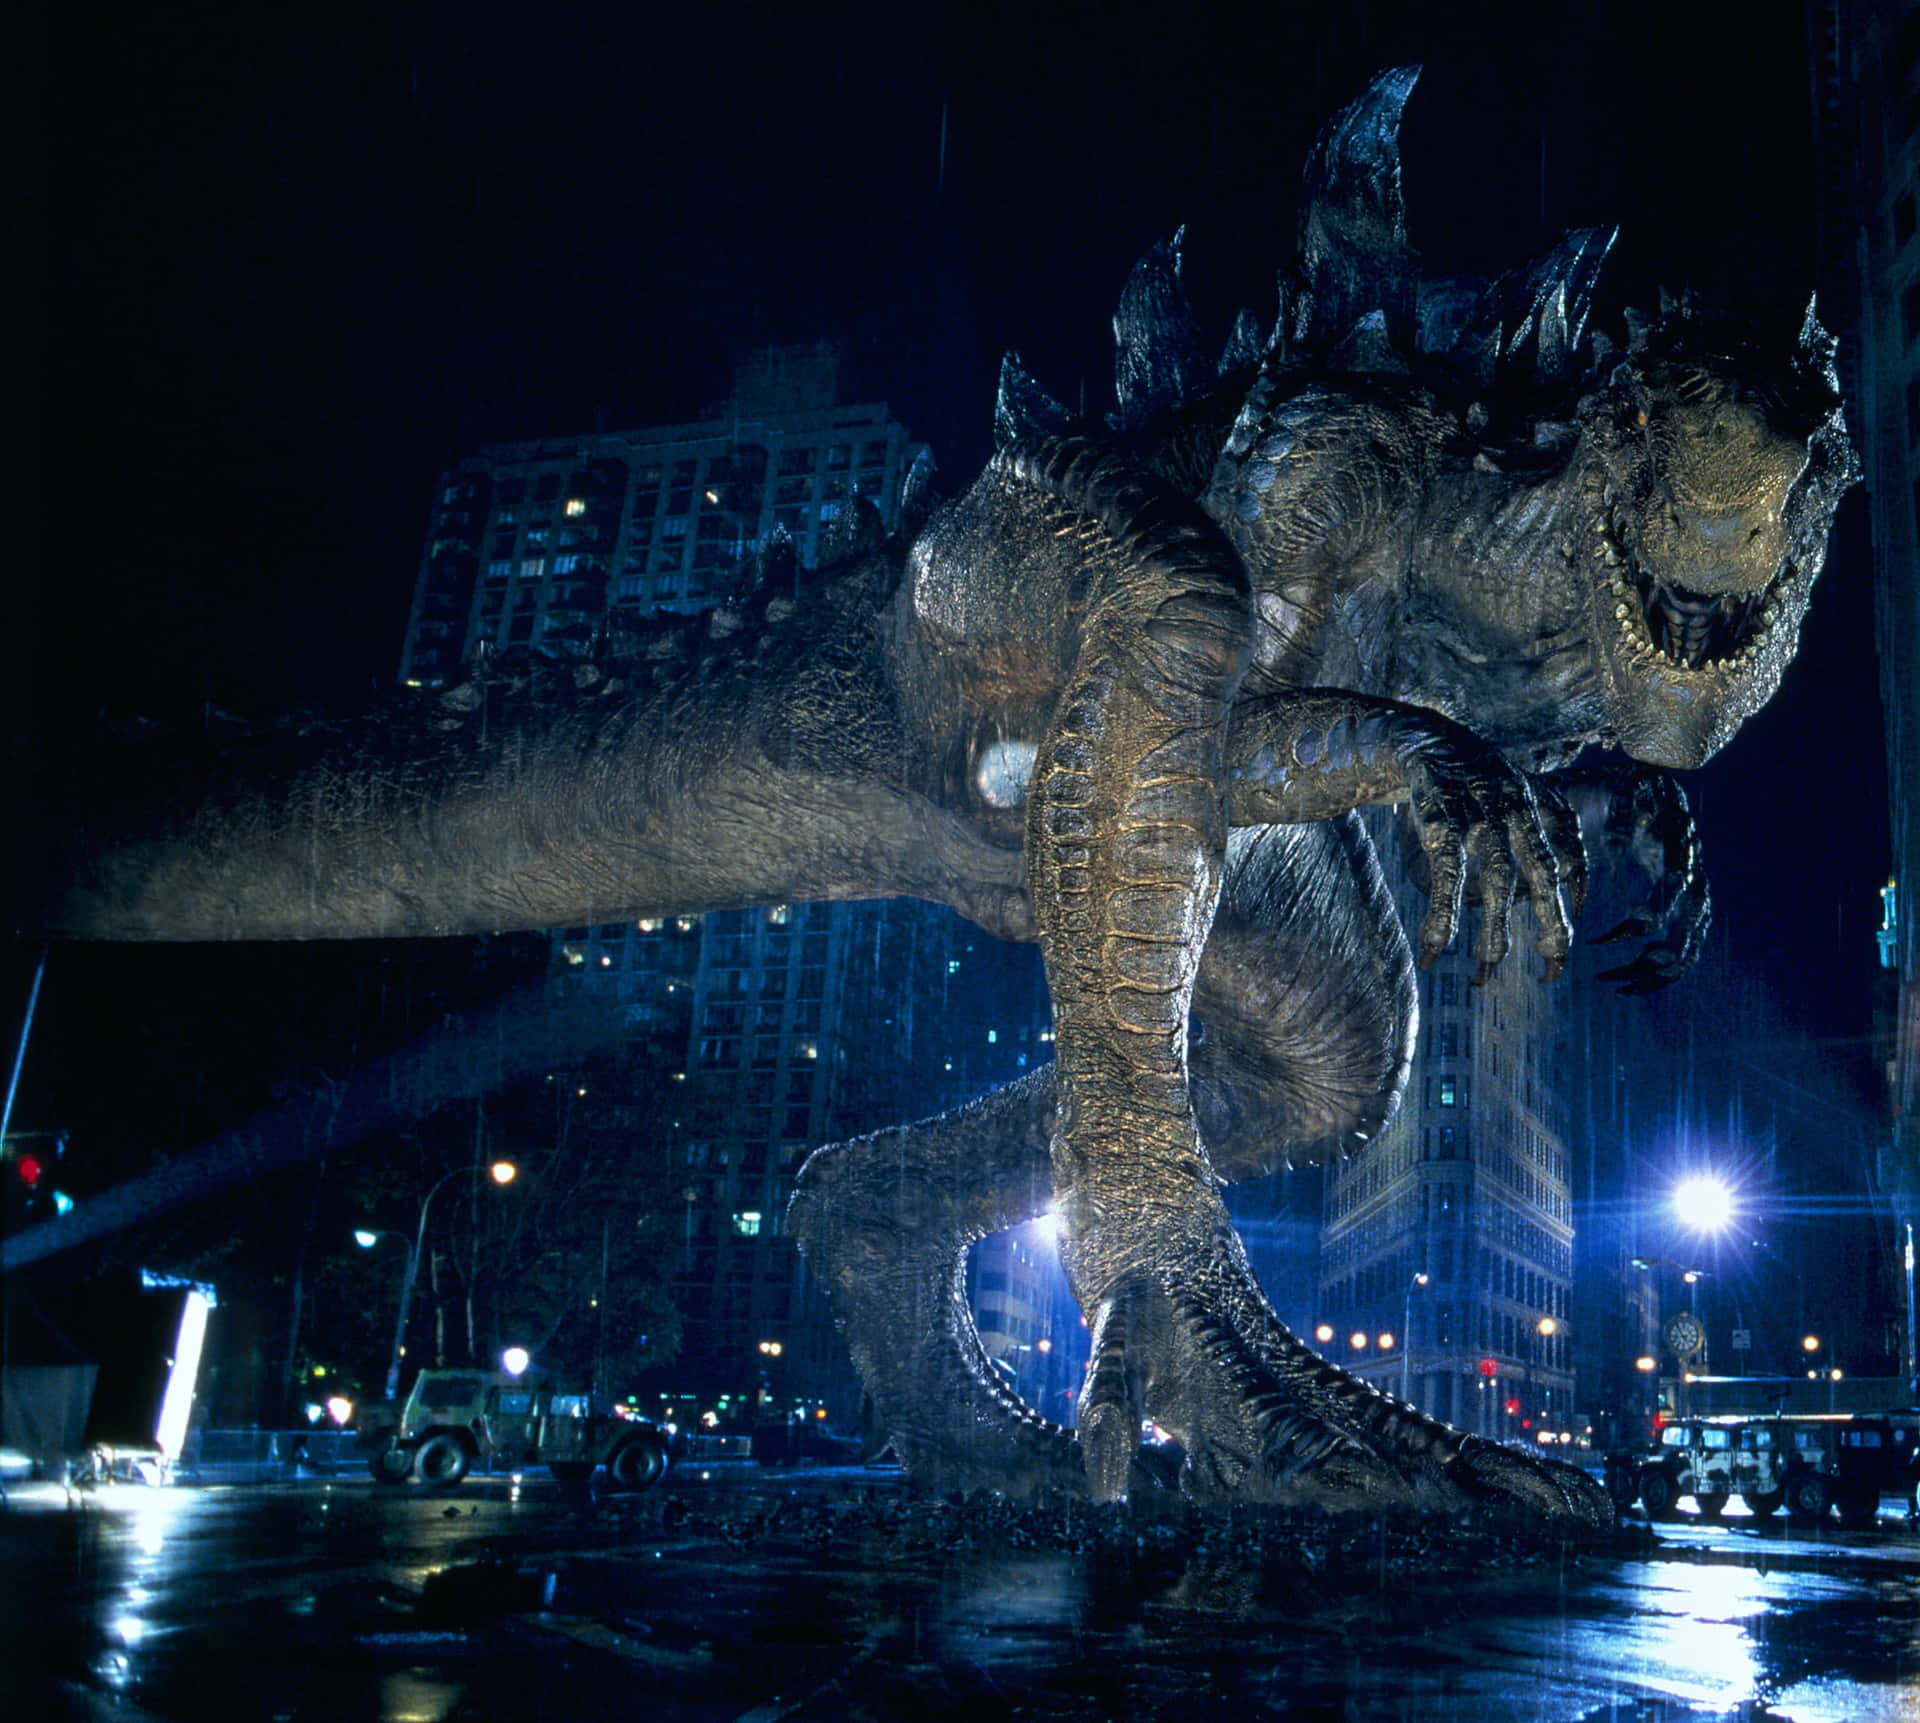 Majestic Godzilla In The Midst Of A Thunderous Night